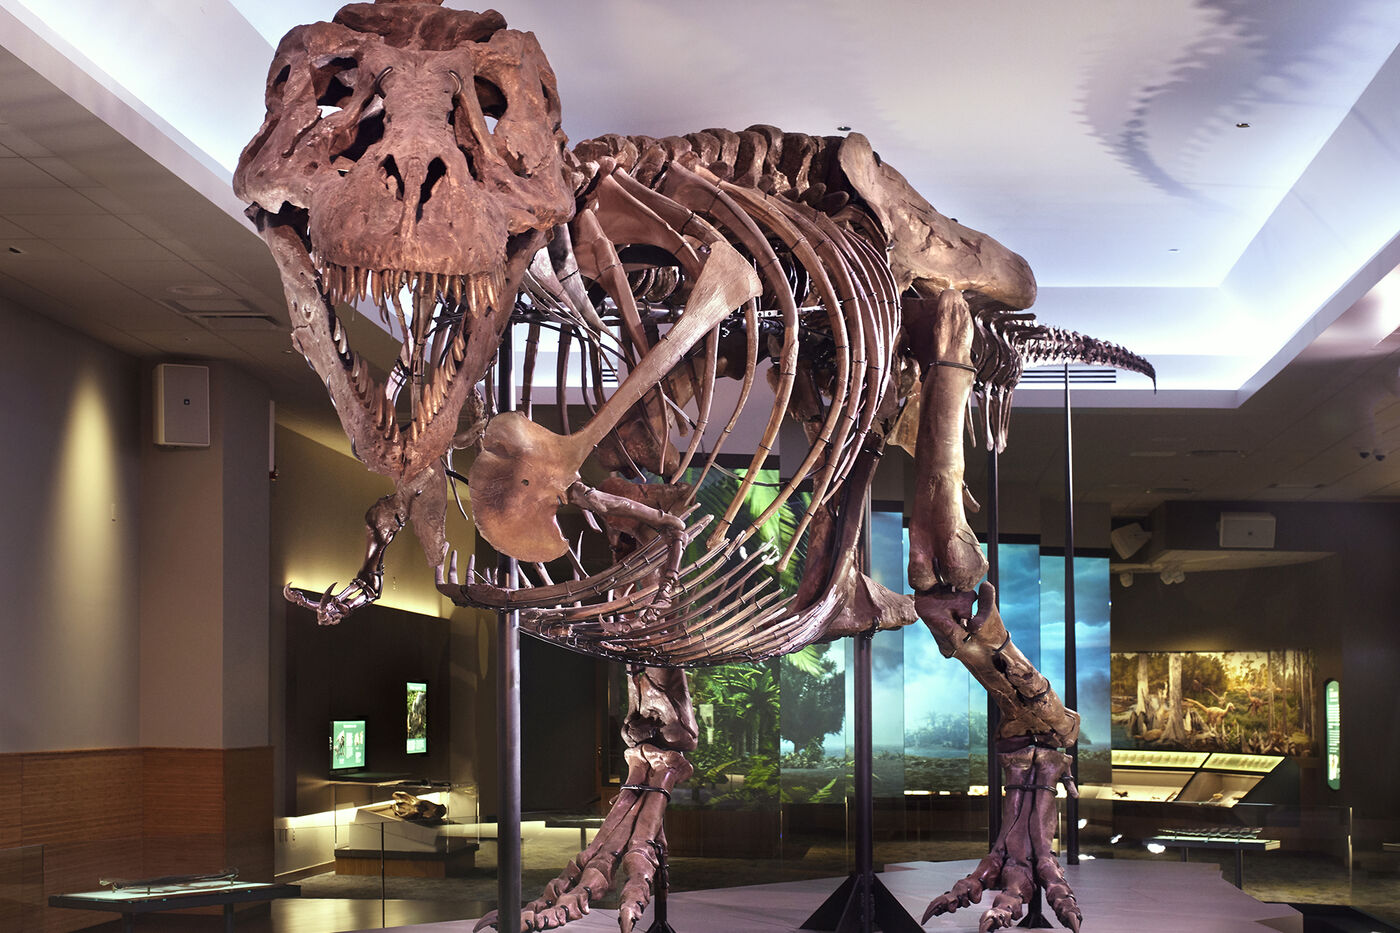 SUE the T. rex fossil in their exhibition space, looking directly from the front.